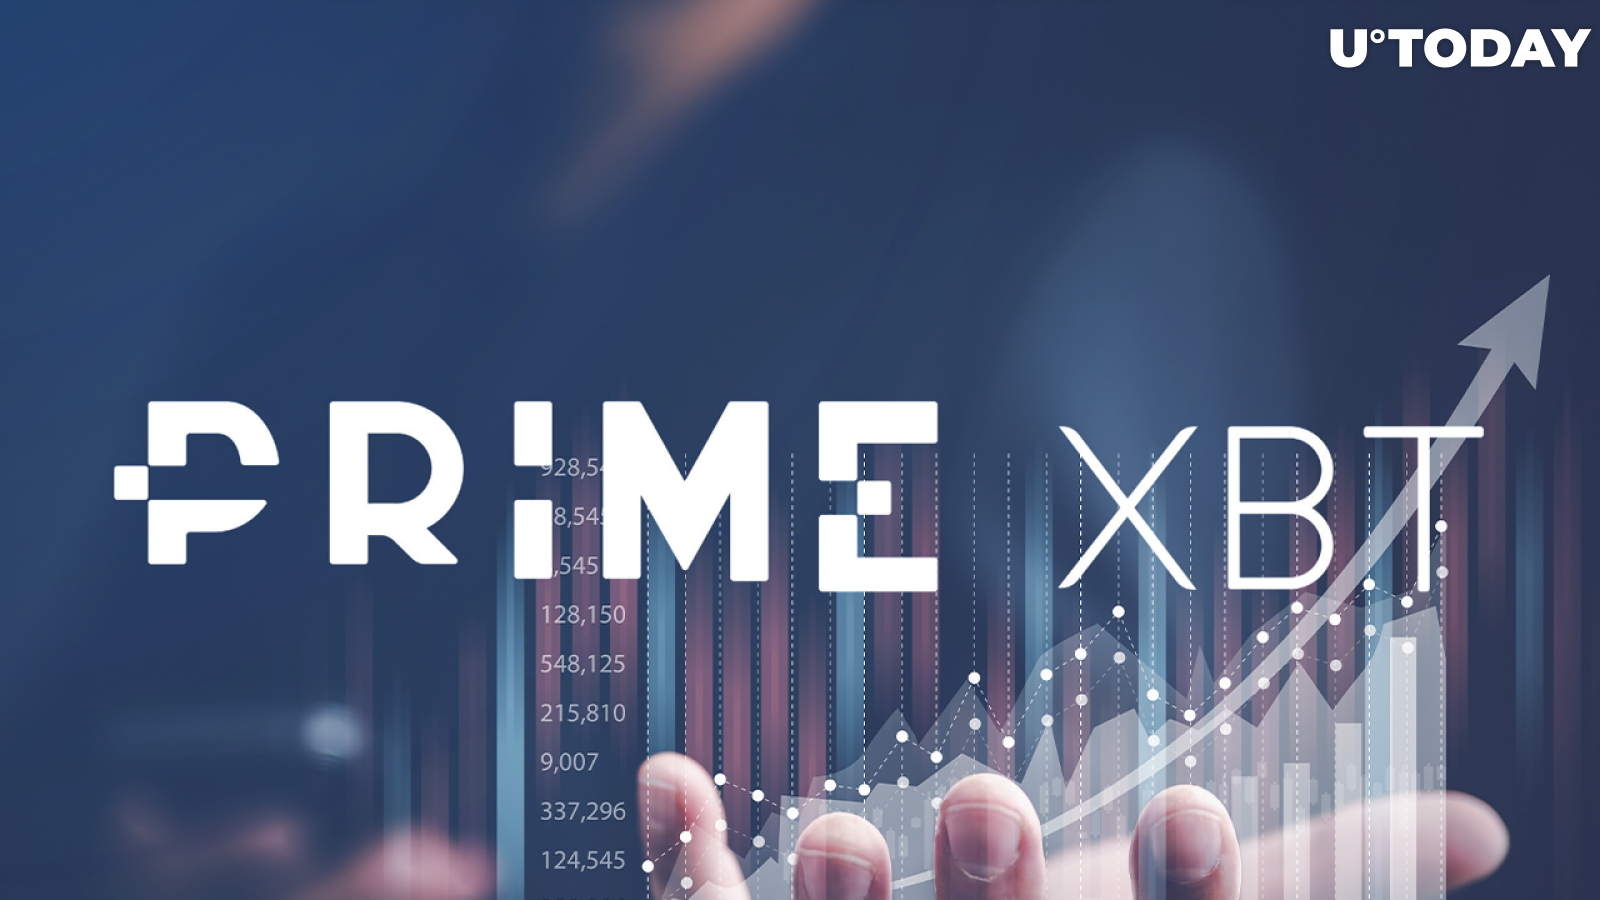 PrimeXBT Offers New Users $500 Welcome Bonus Upon First Deposit